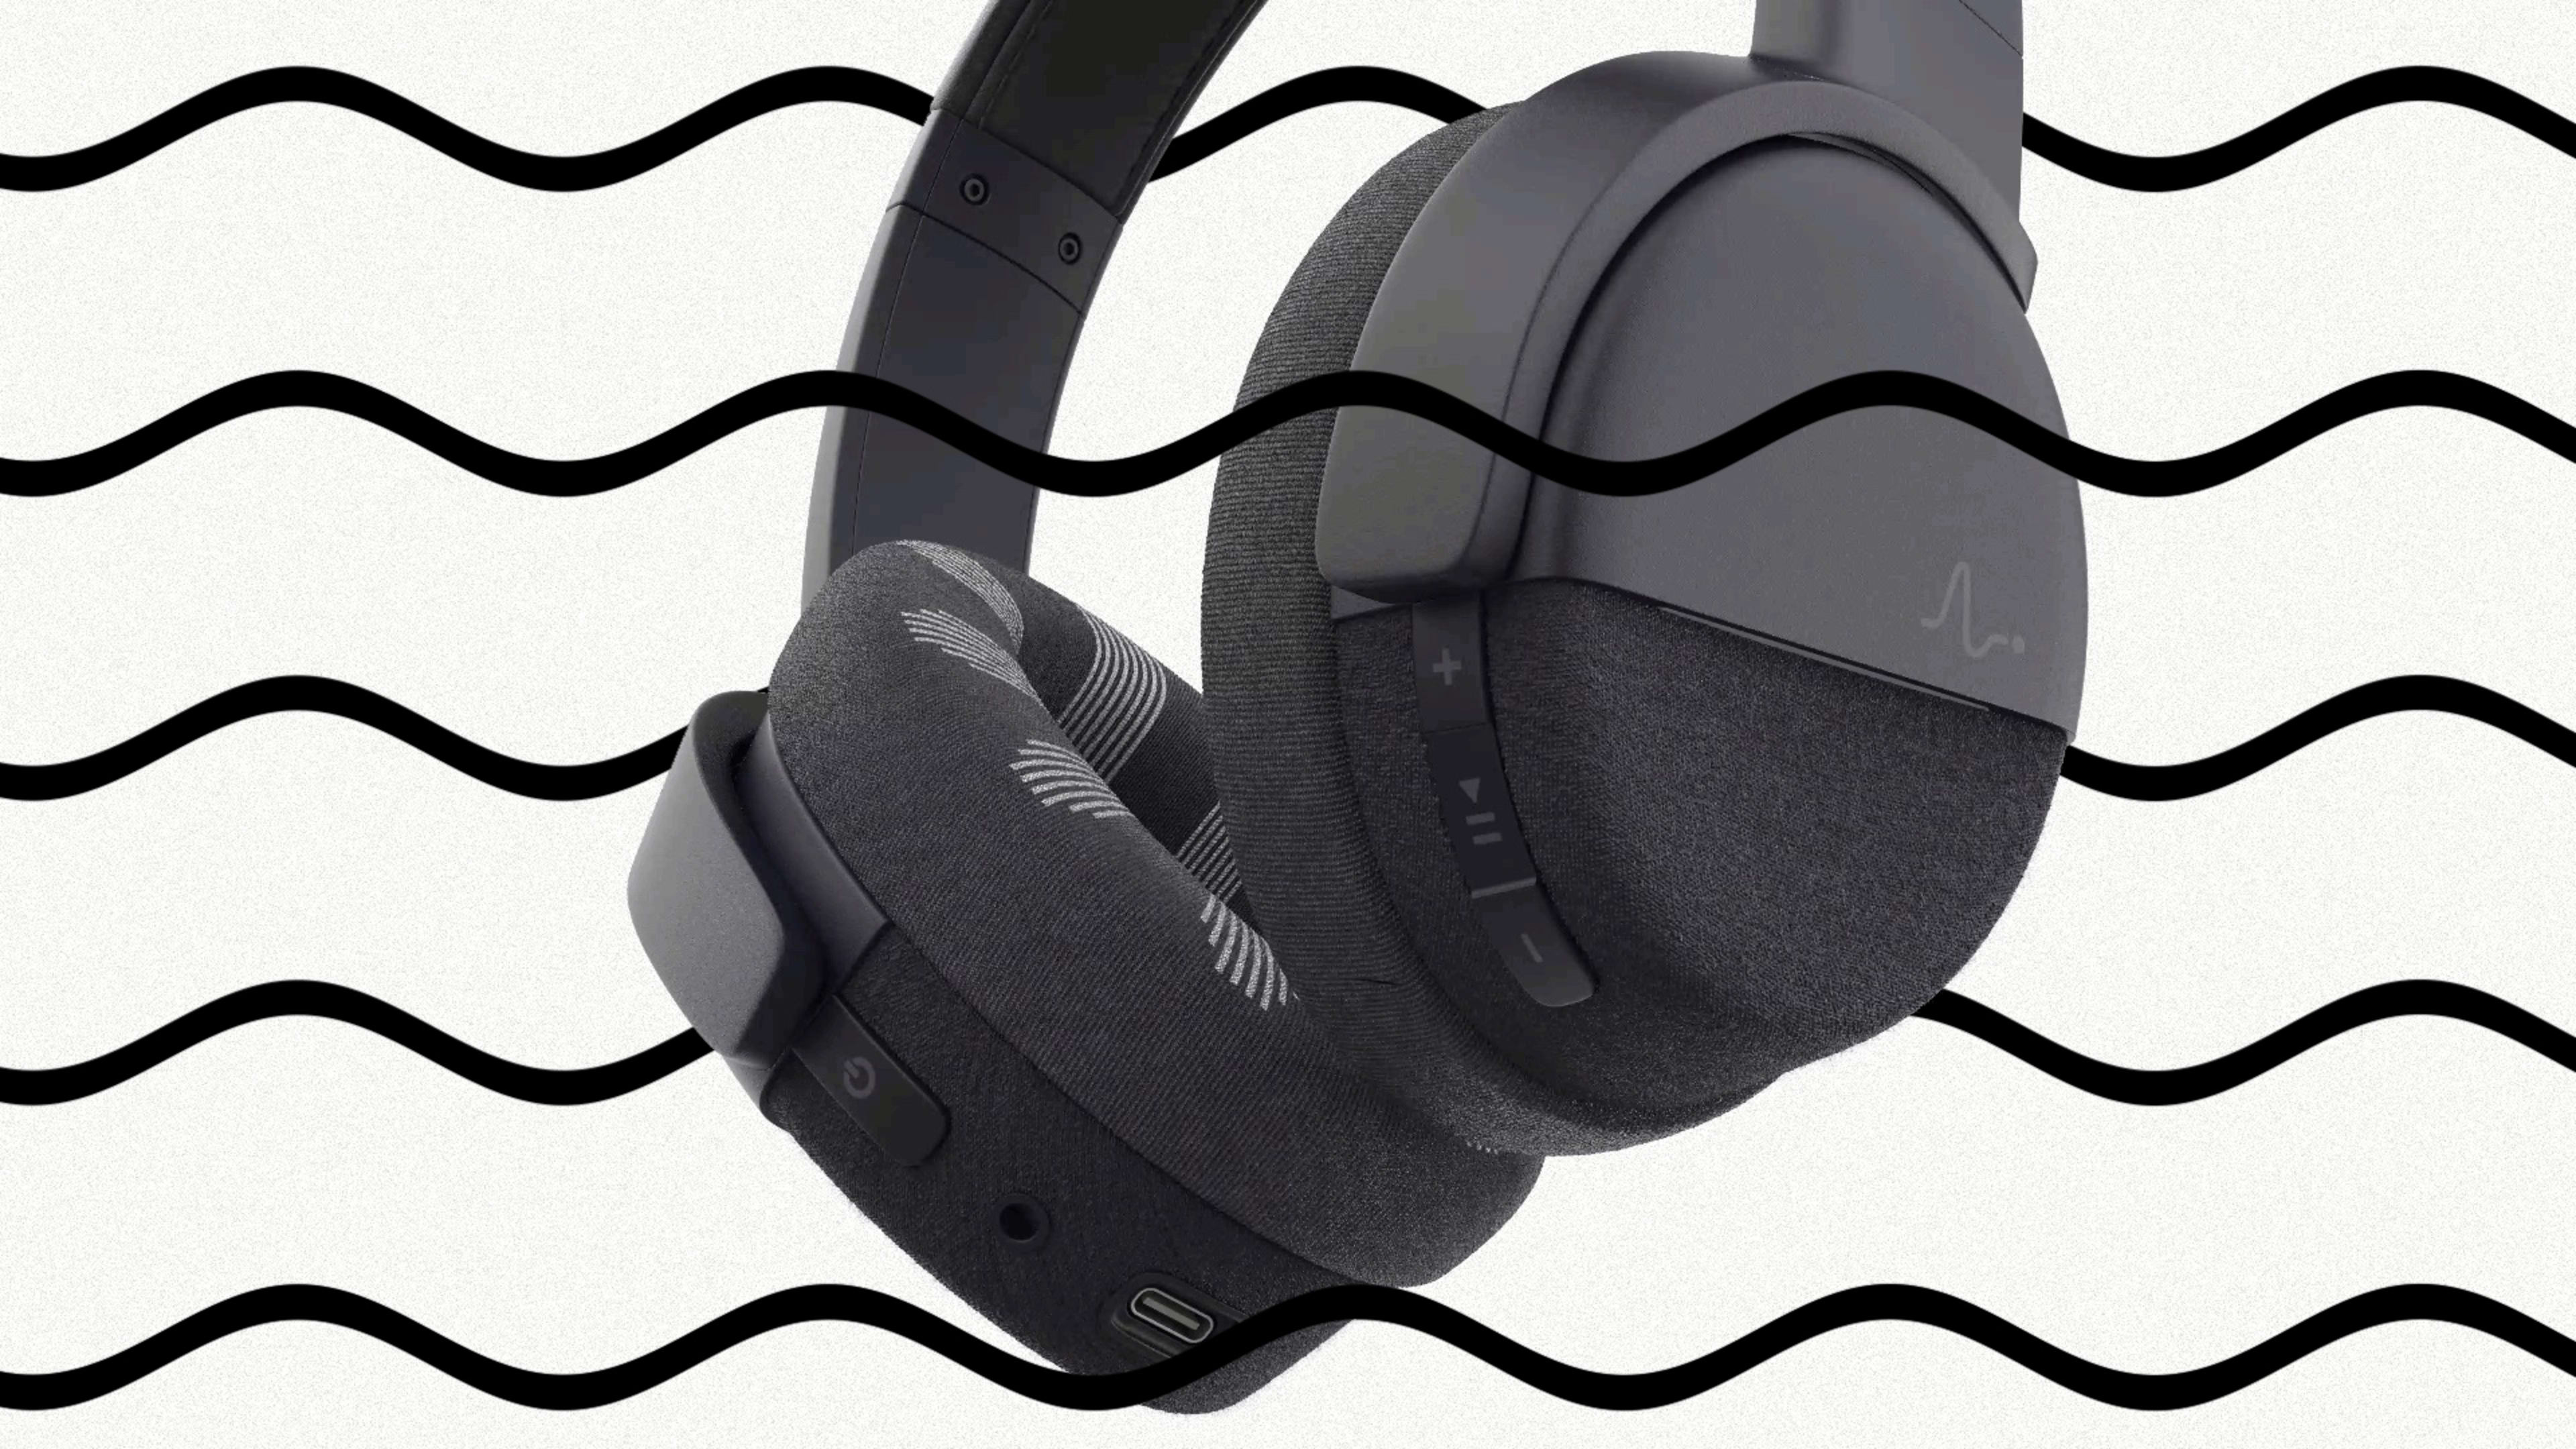 These brainwave-reading headphones are designed to help you focus